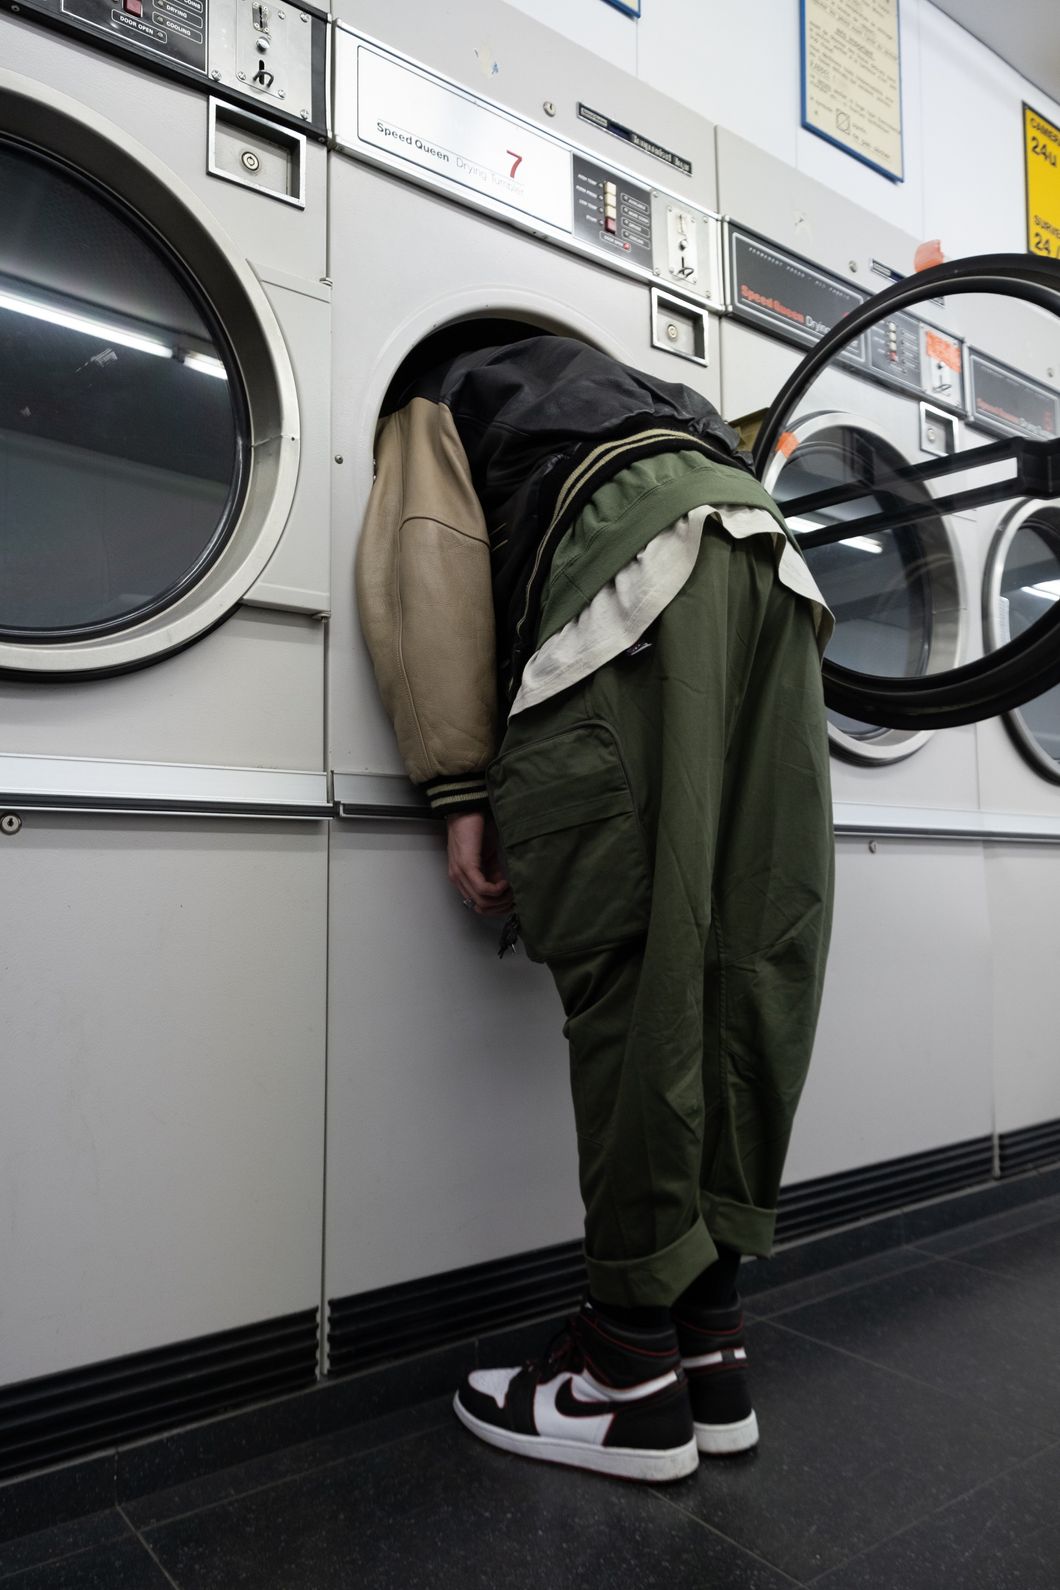 Man with a reen jacket with head inside a white front load washing machine